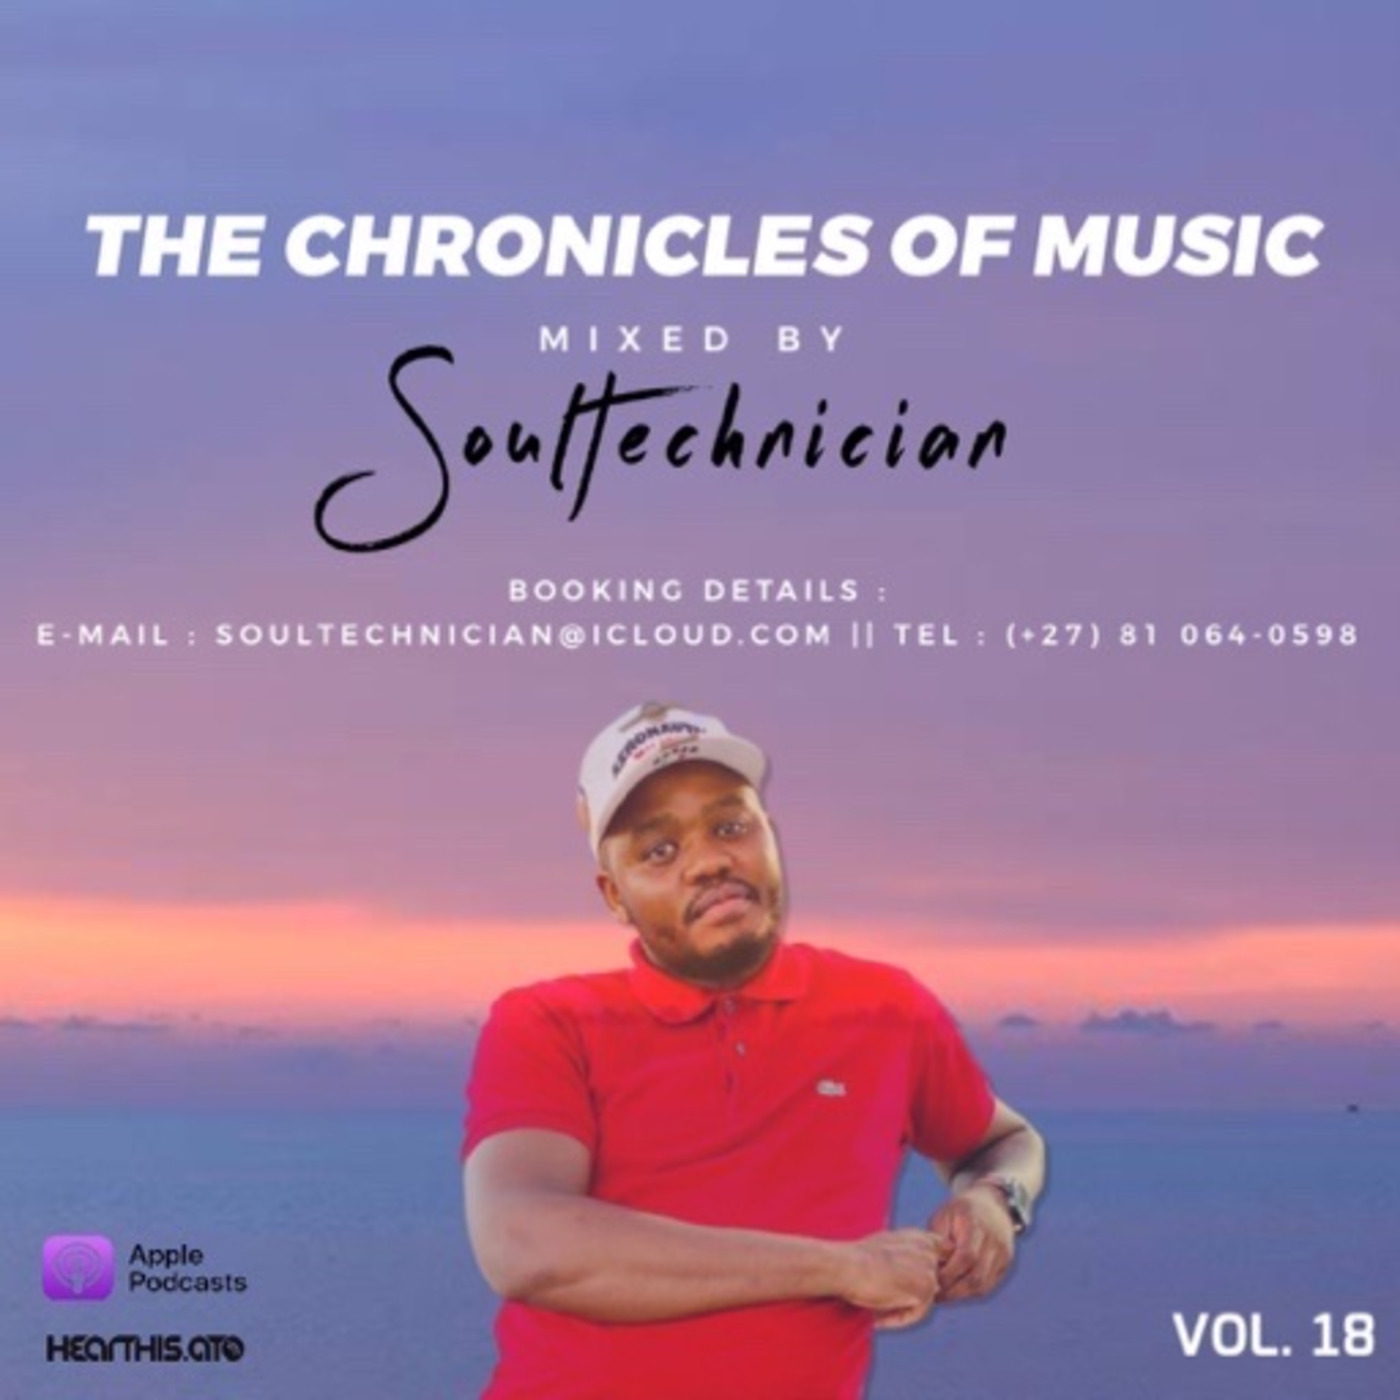 The Chronicles Of Music Vol. 18 (Mixed By Soultechnician)